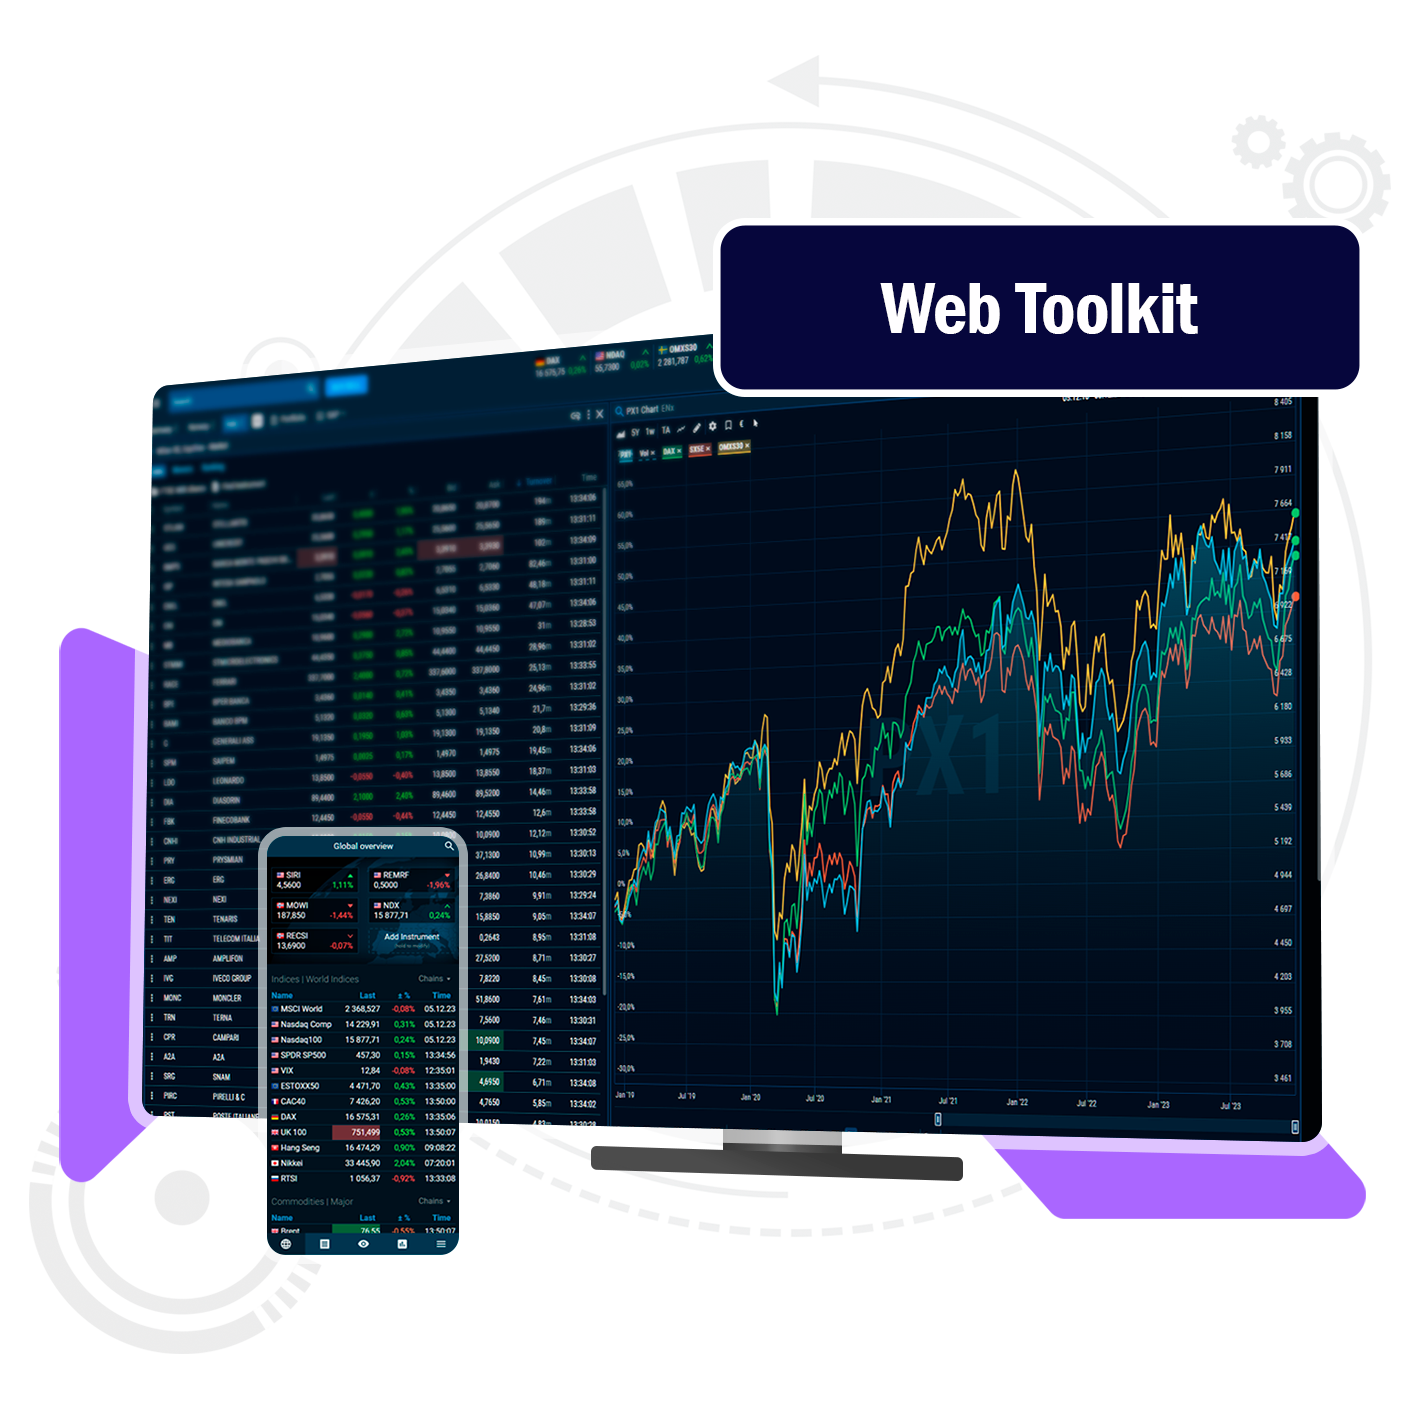 Infront web toolkit dashboard